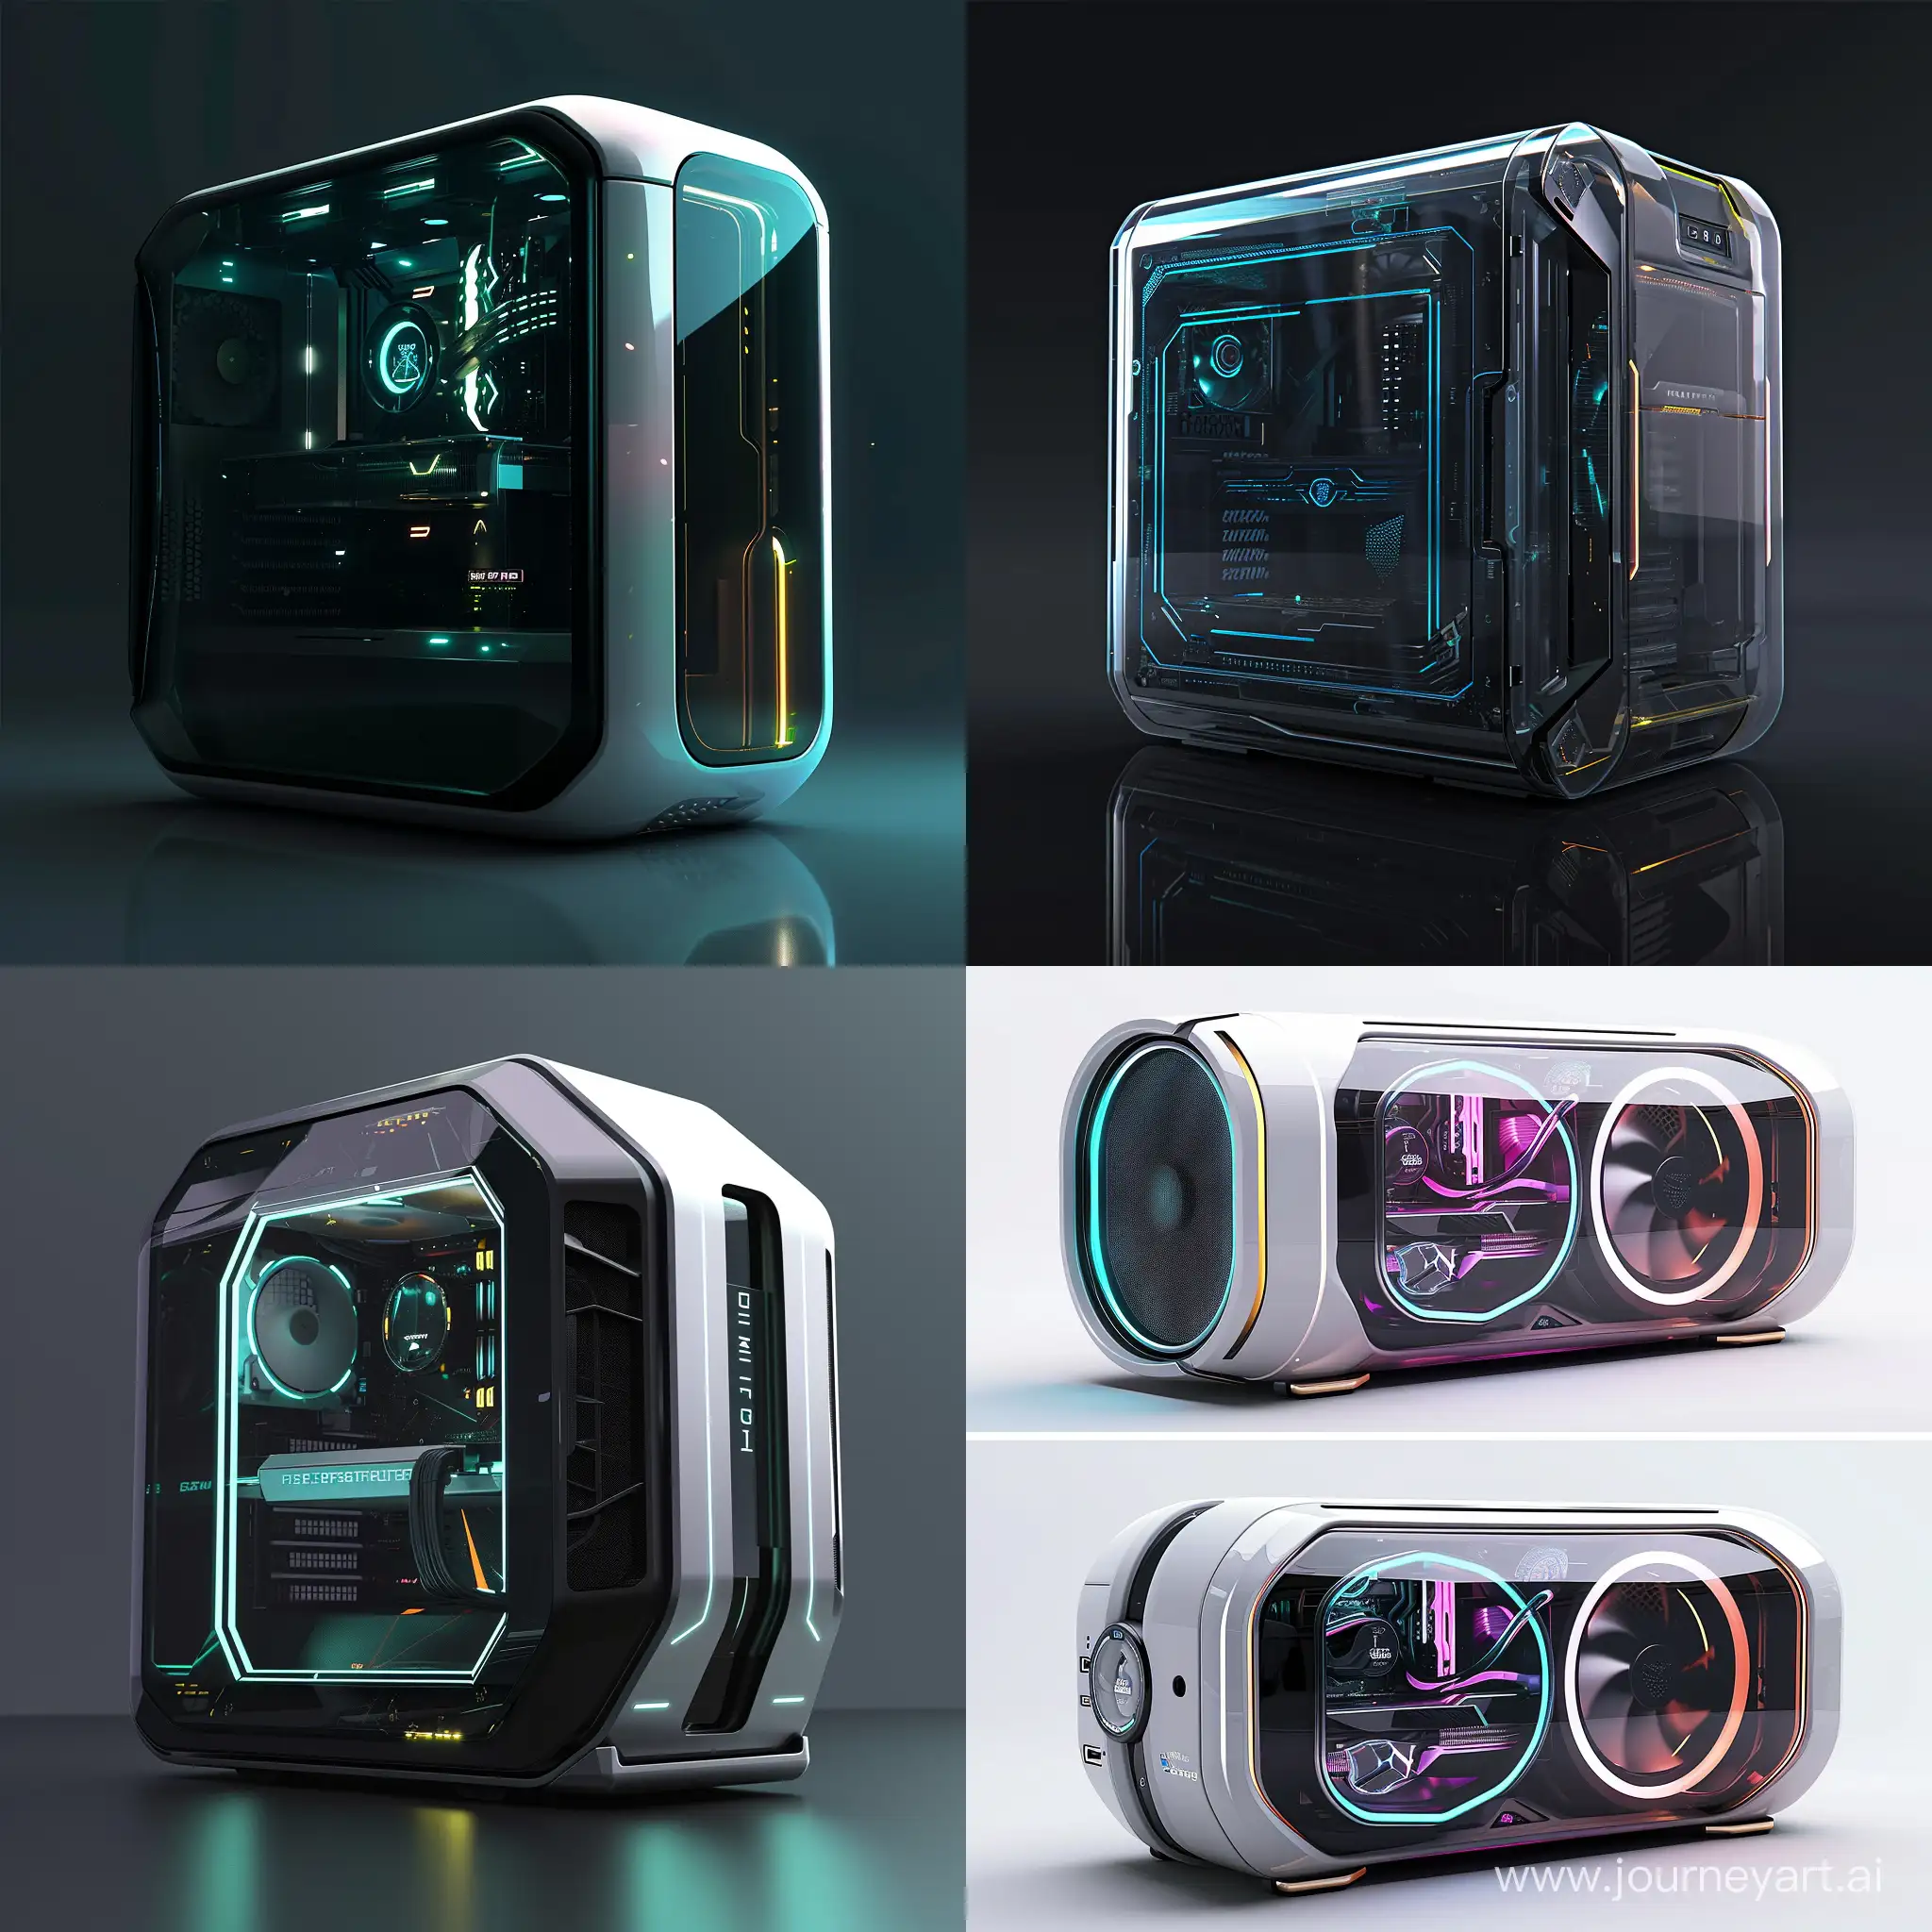 Futuristic-Modular-PC-Case-with-Advanced-Features-and-EcoFriendly-Design